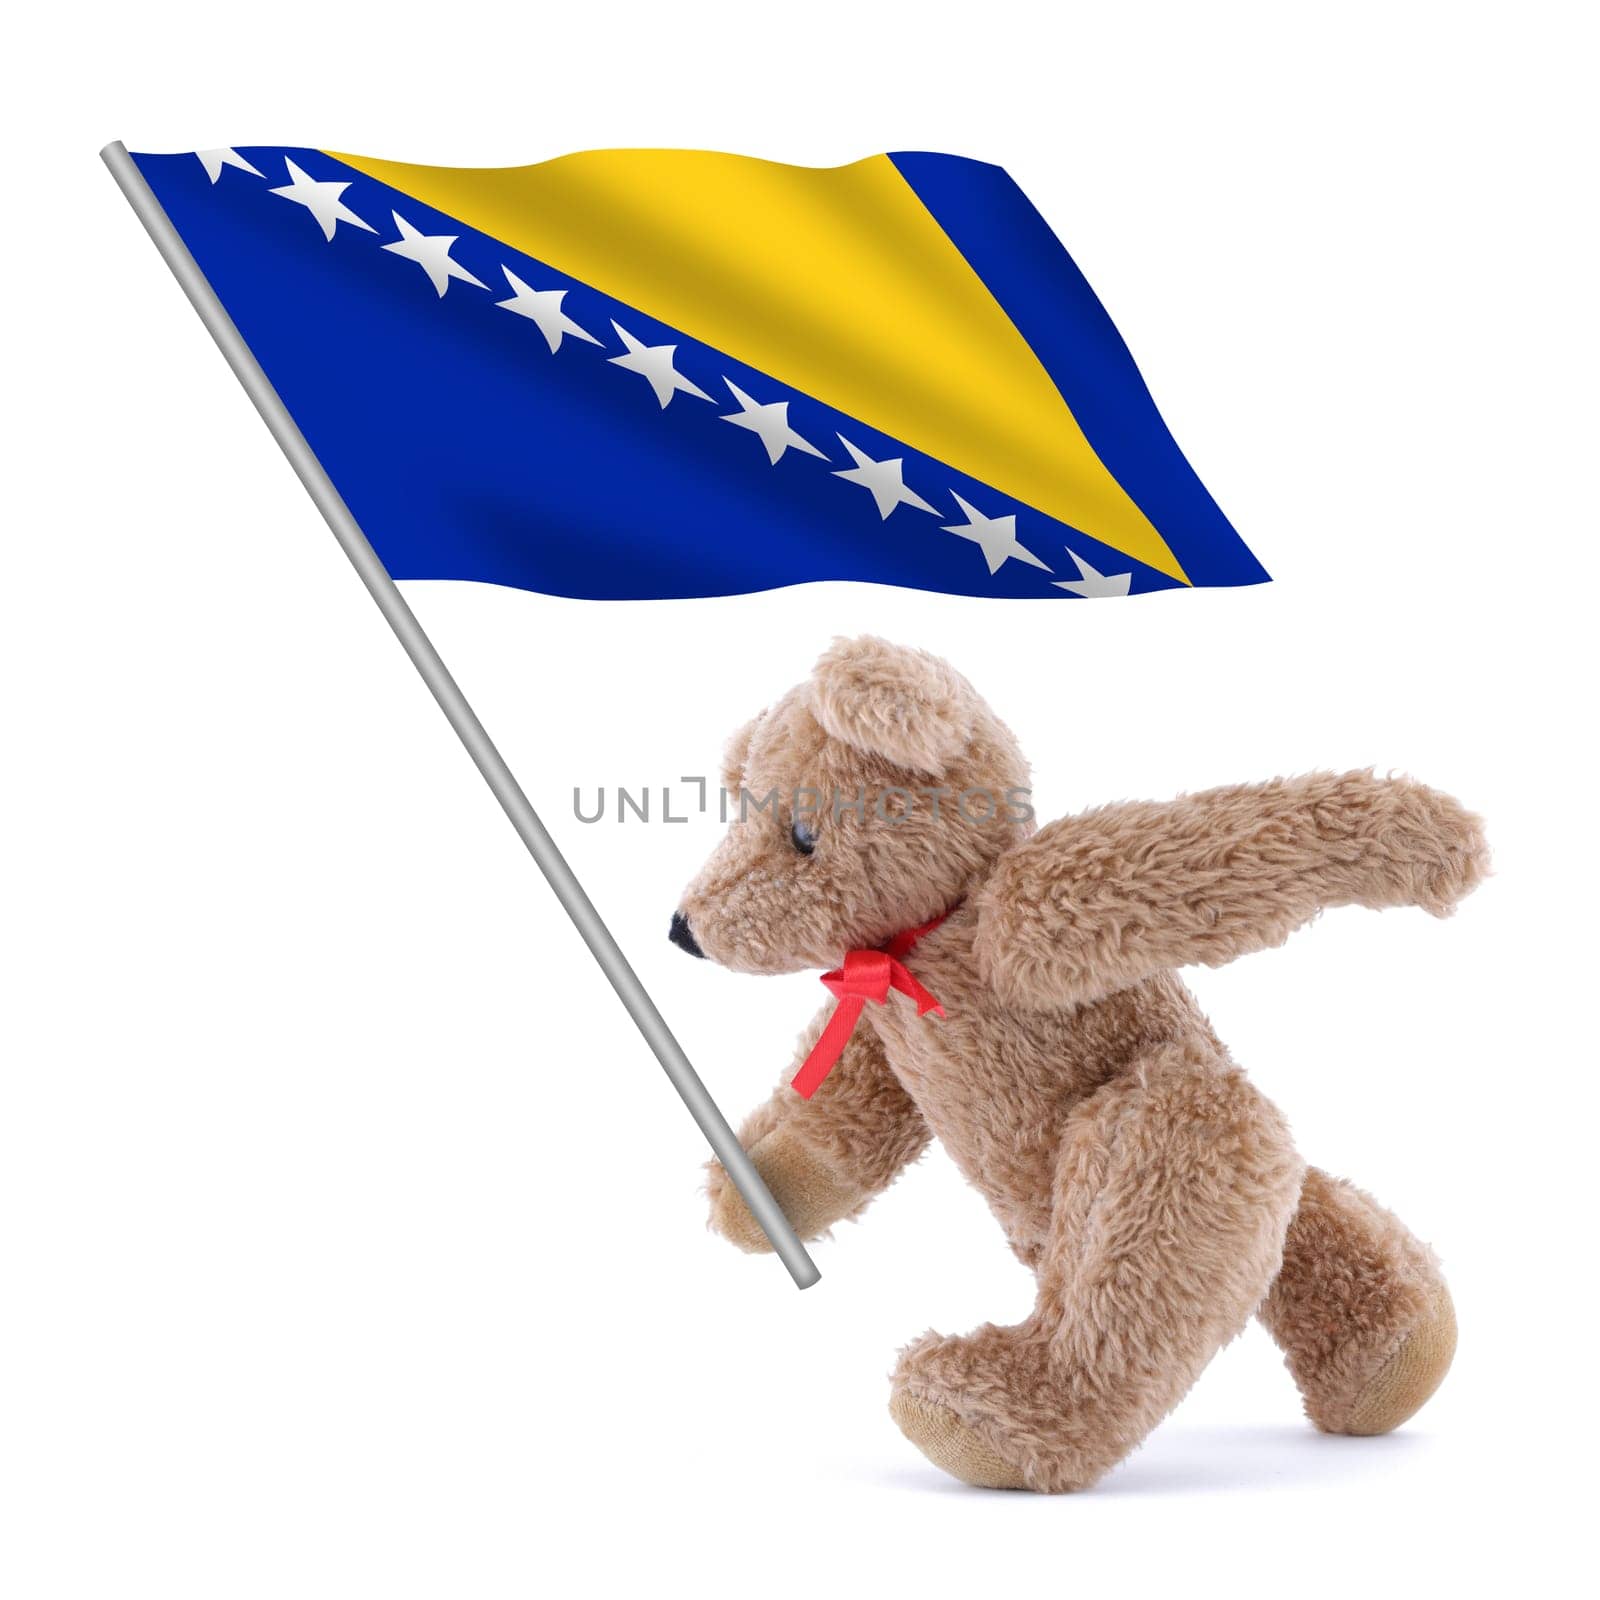 Bosnia Herzegovina flag being carried by a cute teddy bear by VivacityImages